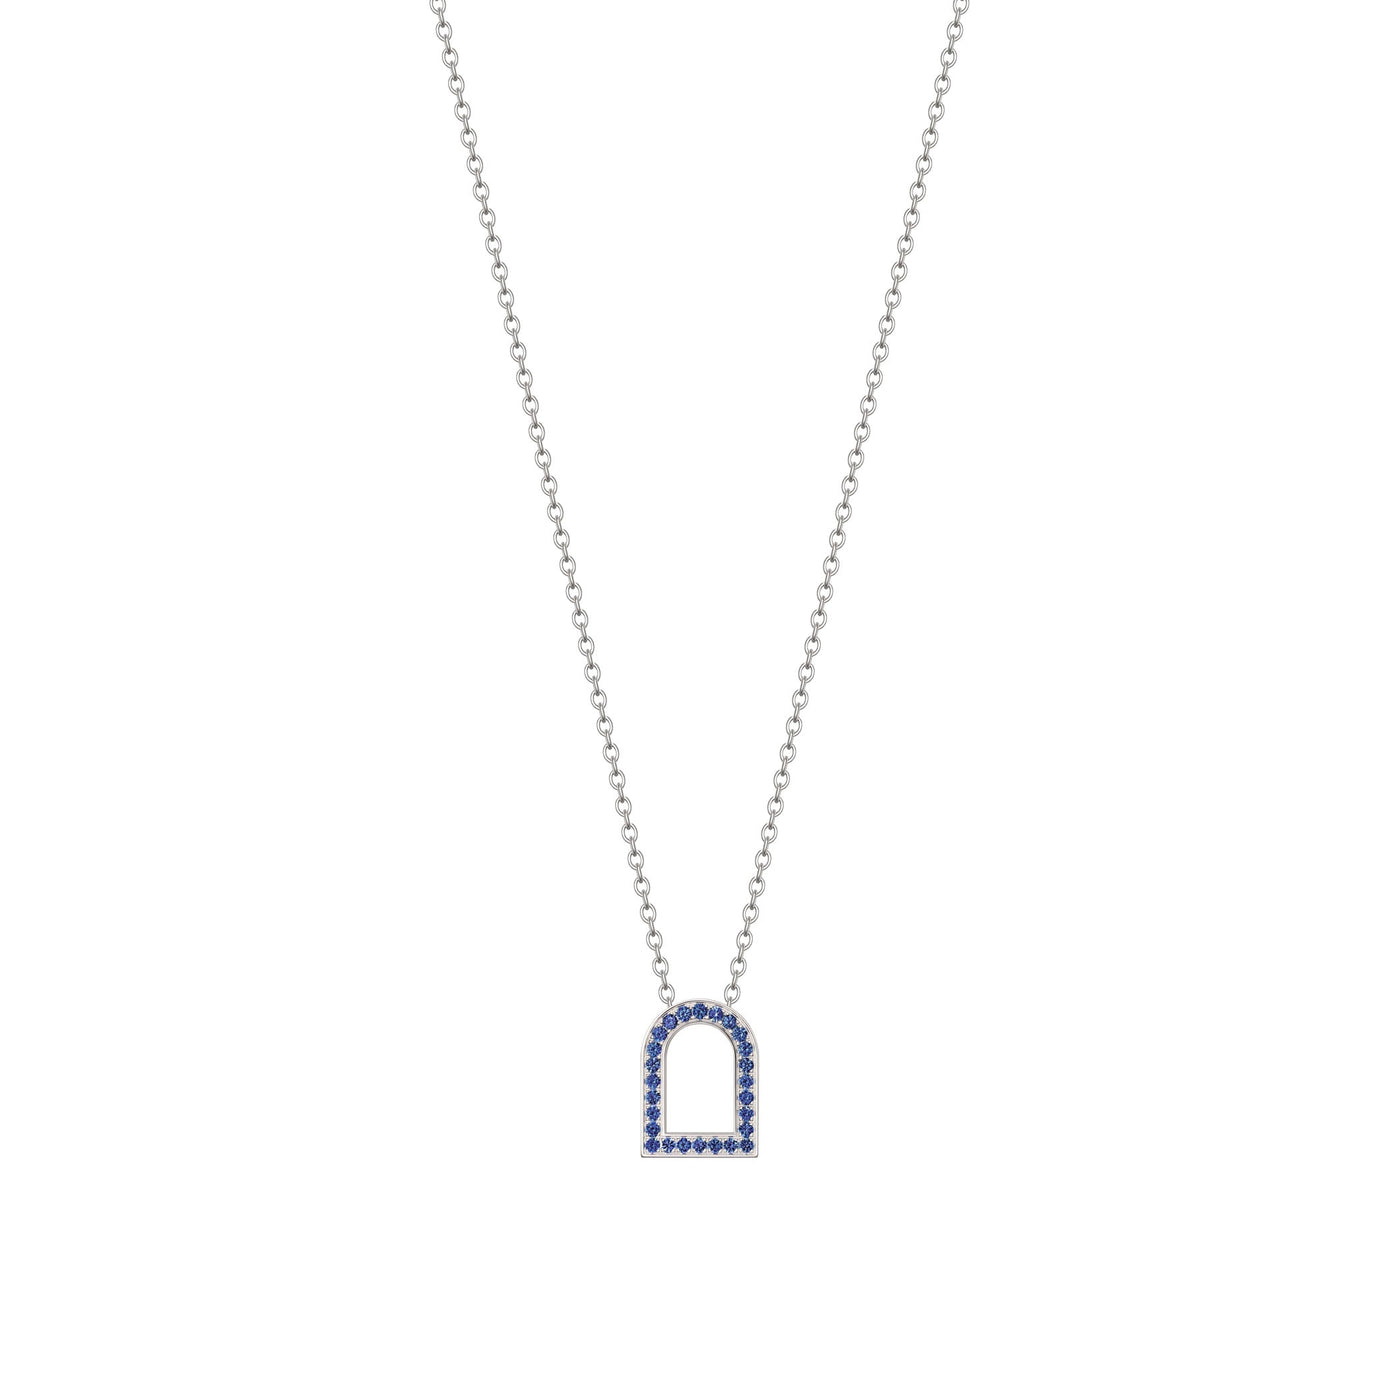 L'Arc Voyage Charm MM, 18k White Gold with Galerie Blue Sapphires on Chain Necklace - DAVIDOR